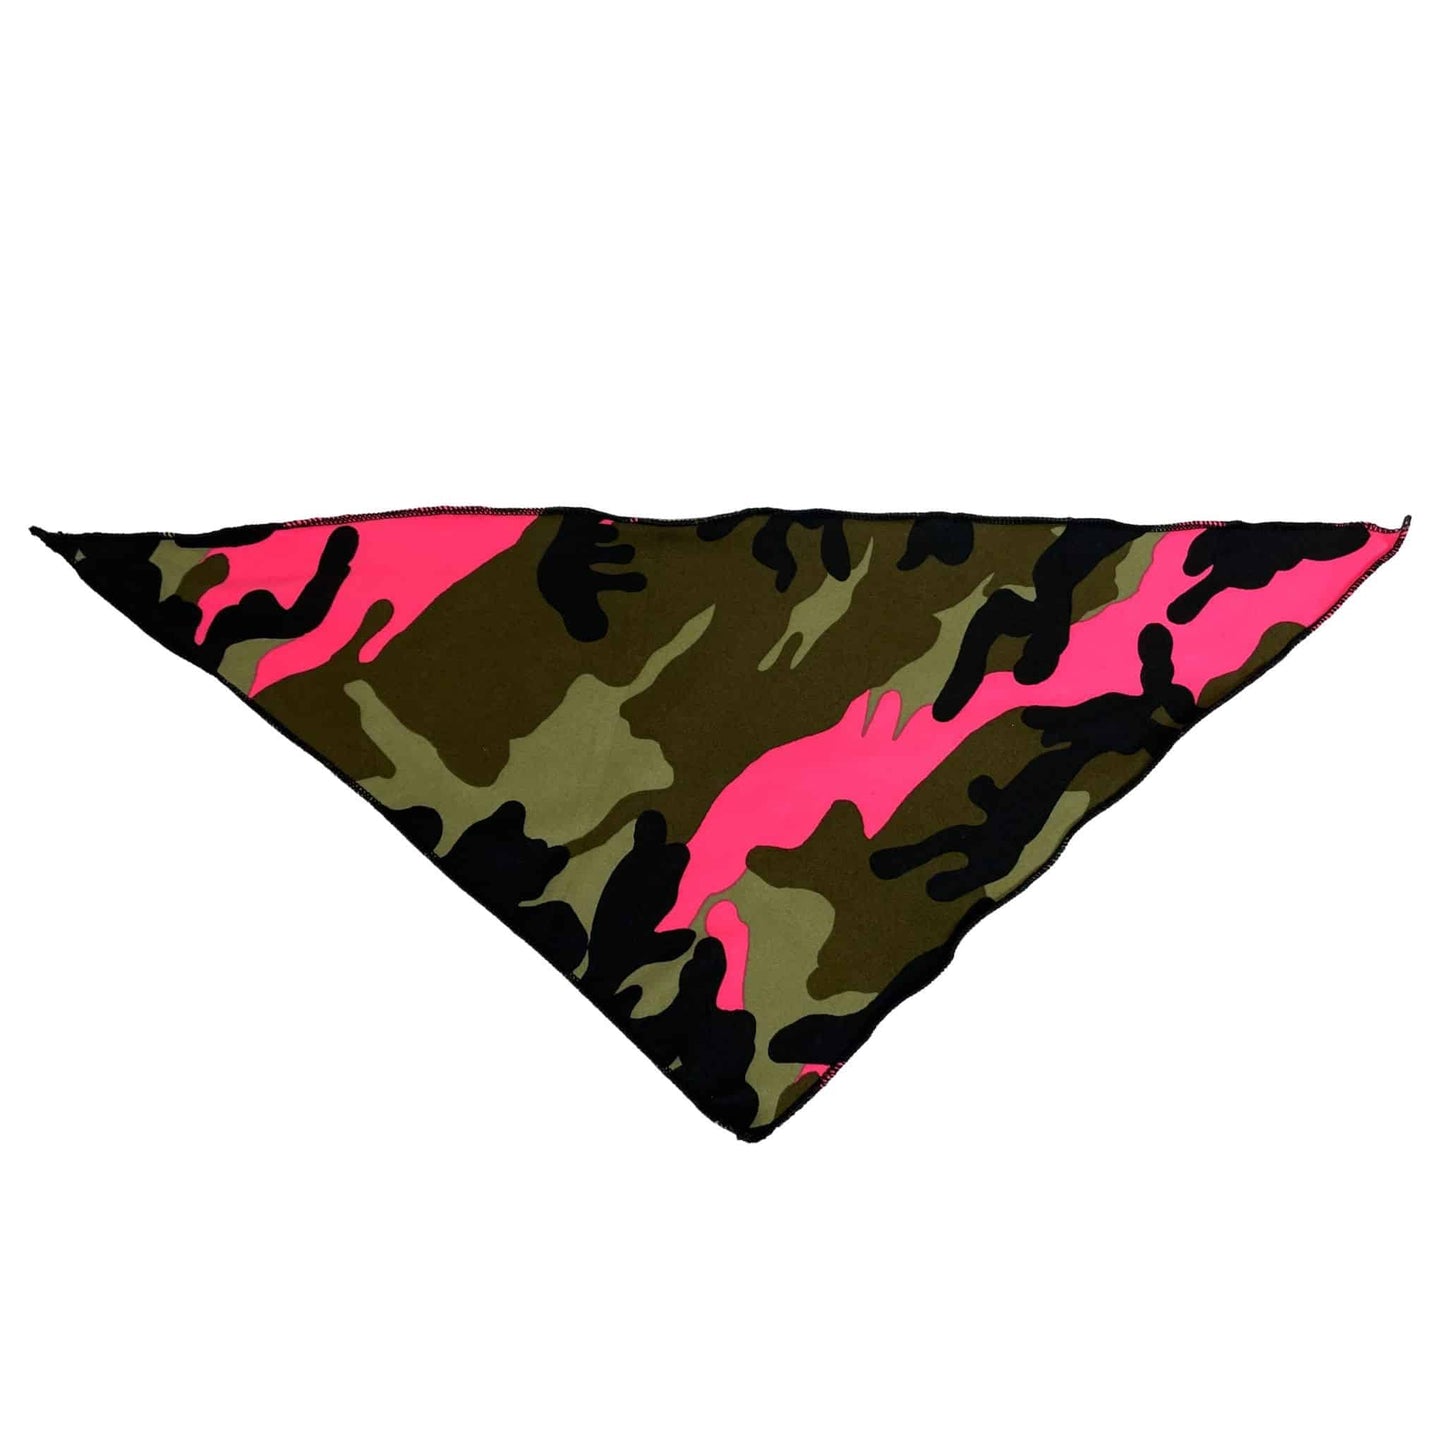 Triangle bandana made of stretchy knit polyester, printed with green and neon pink camo pattern.